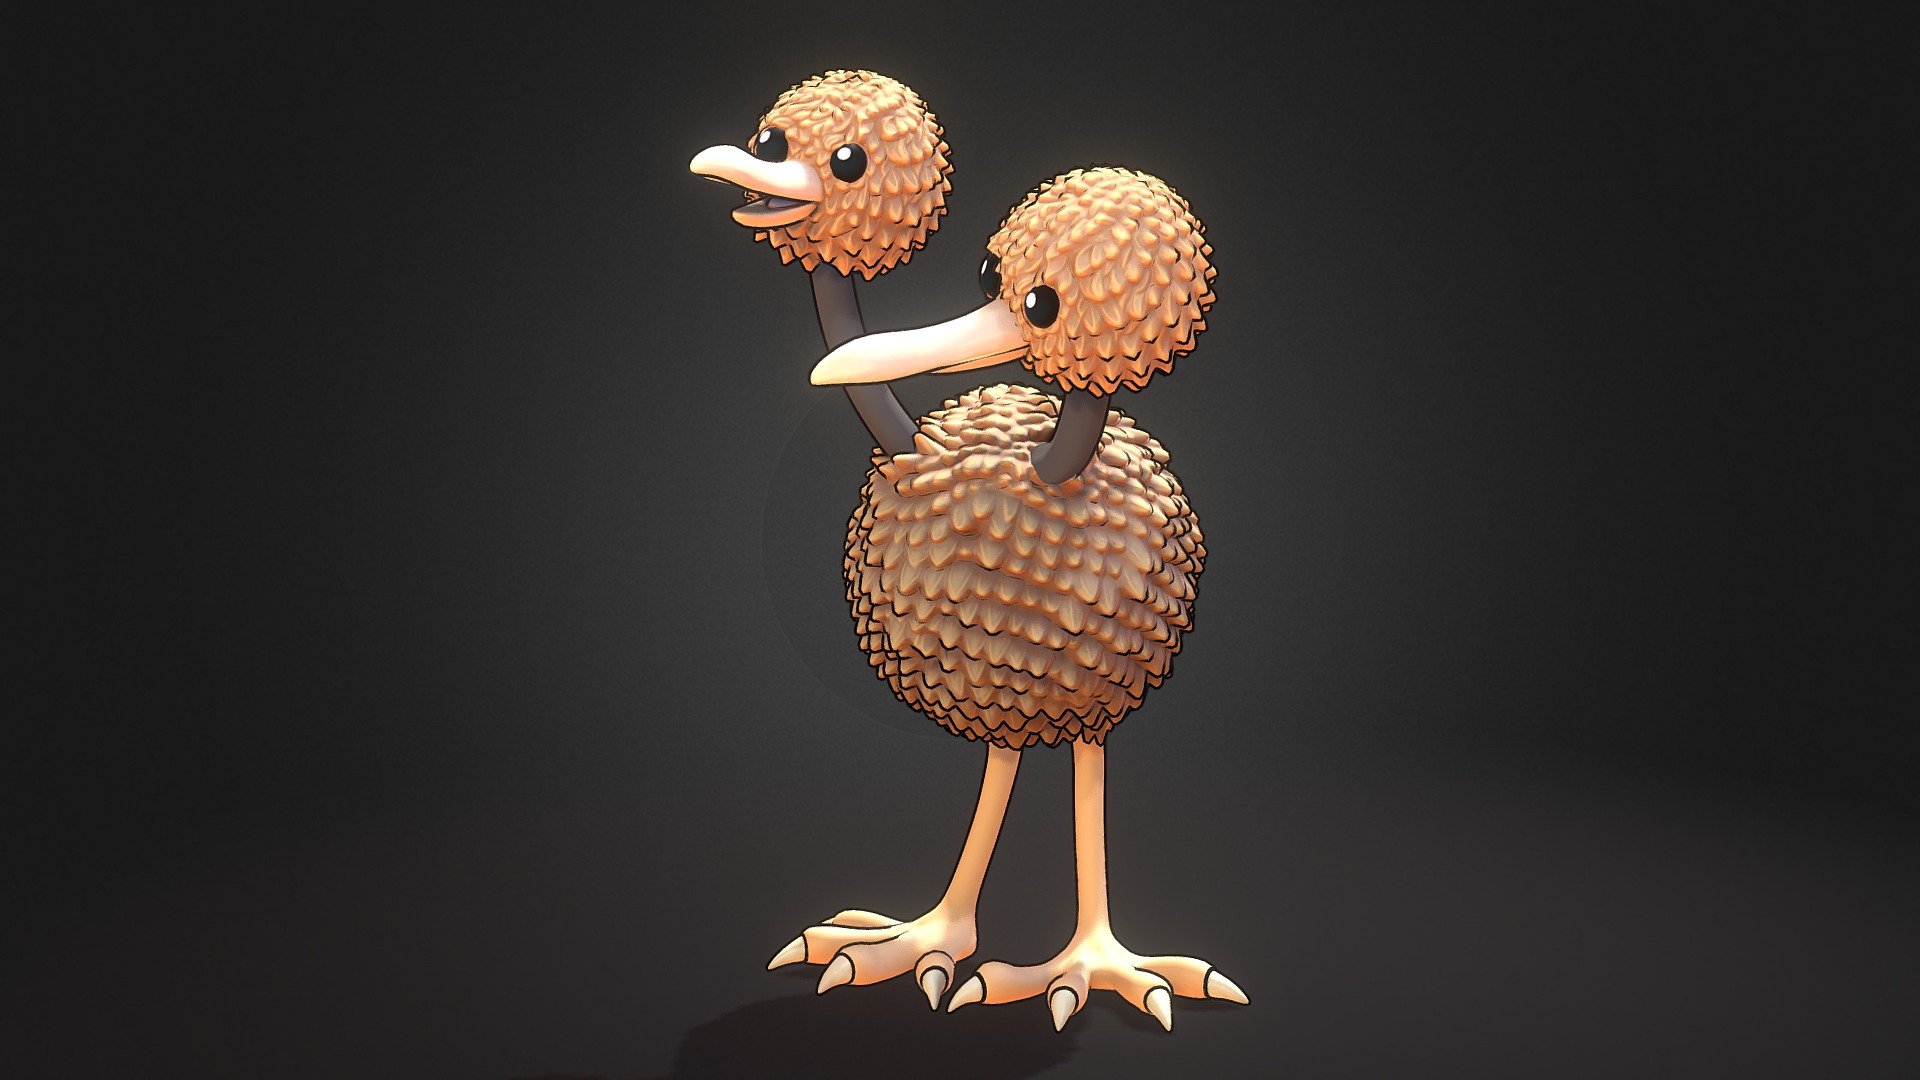 The one with two heads - Doduo Pokemon - 3D model by 3dlogicus 3d model